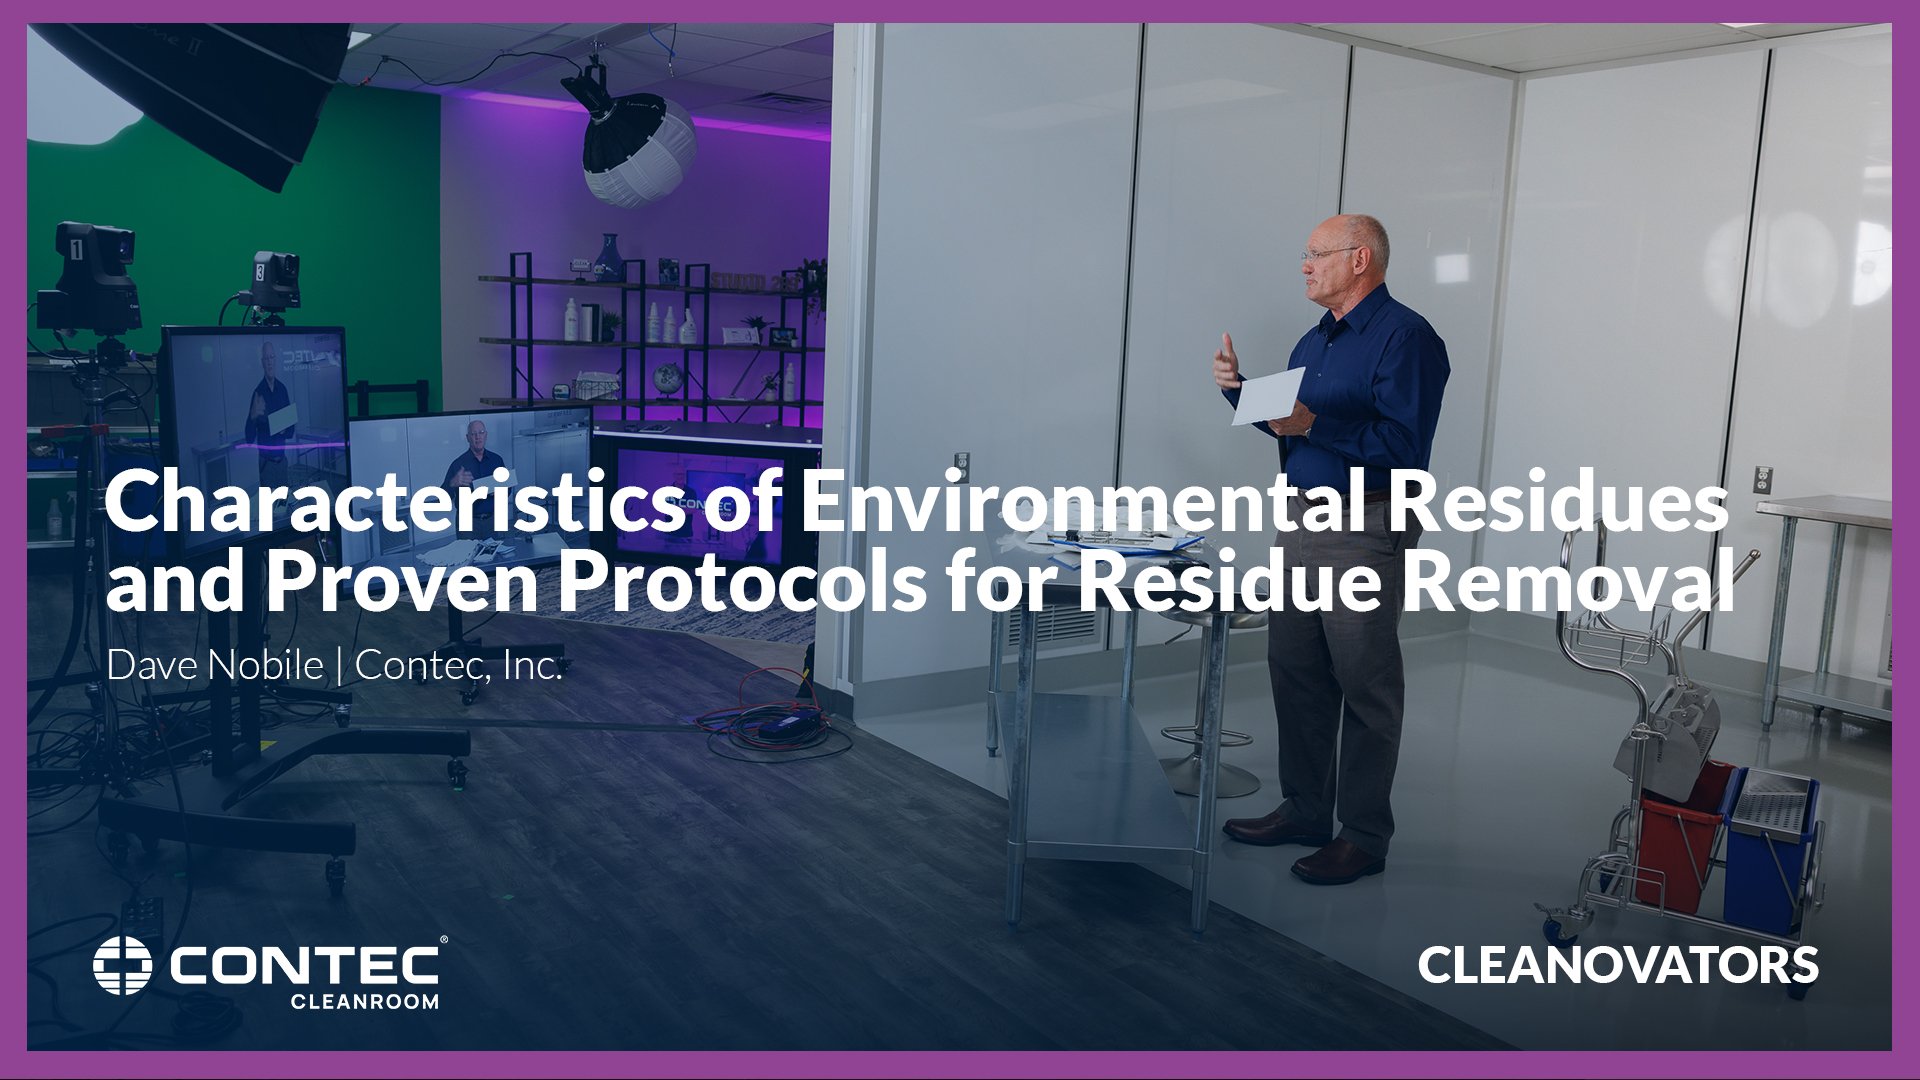 Image of CLEANOVATORS 2023 Characteristics of Environmental Residues and Proven Protocols for Residue Removal